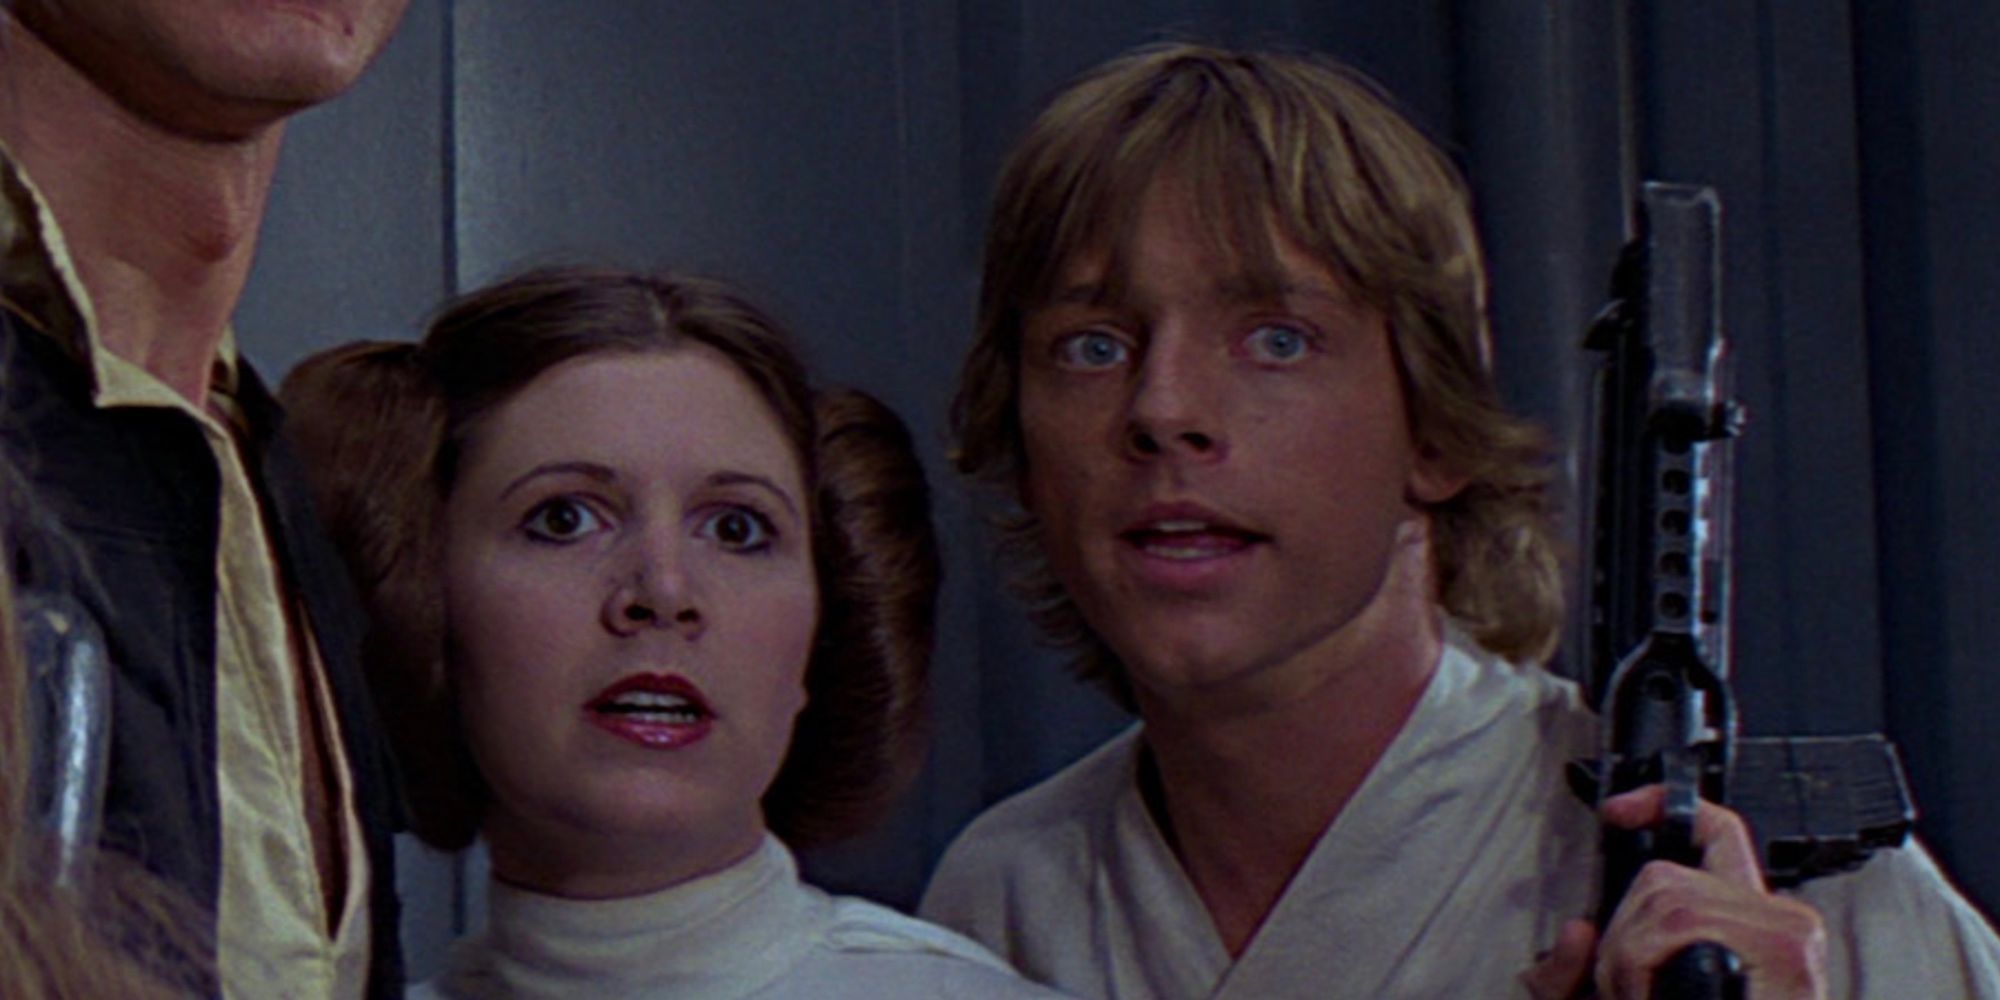 Luke and Leia attempt to escape the Death Star in A New Hope